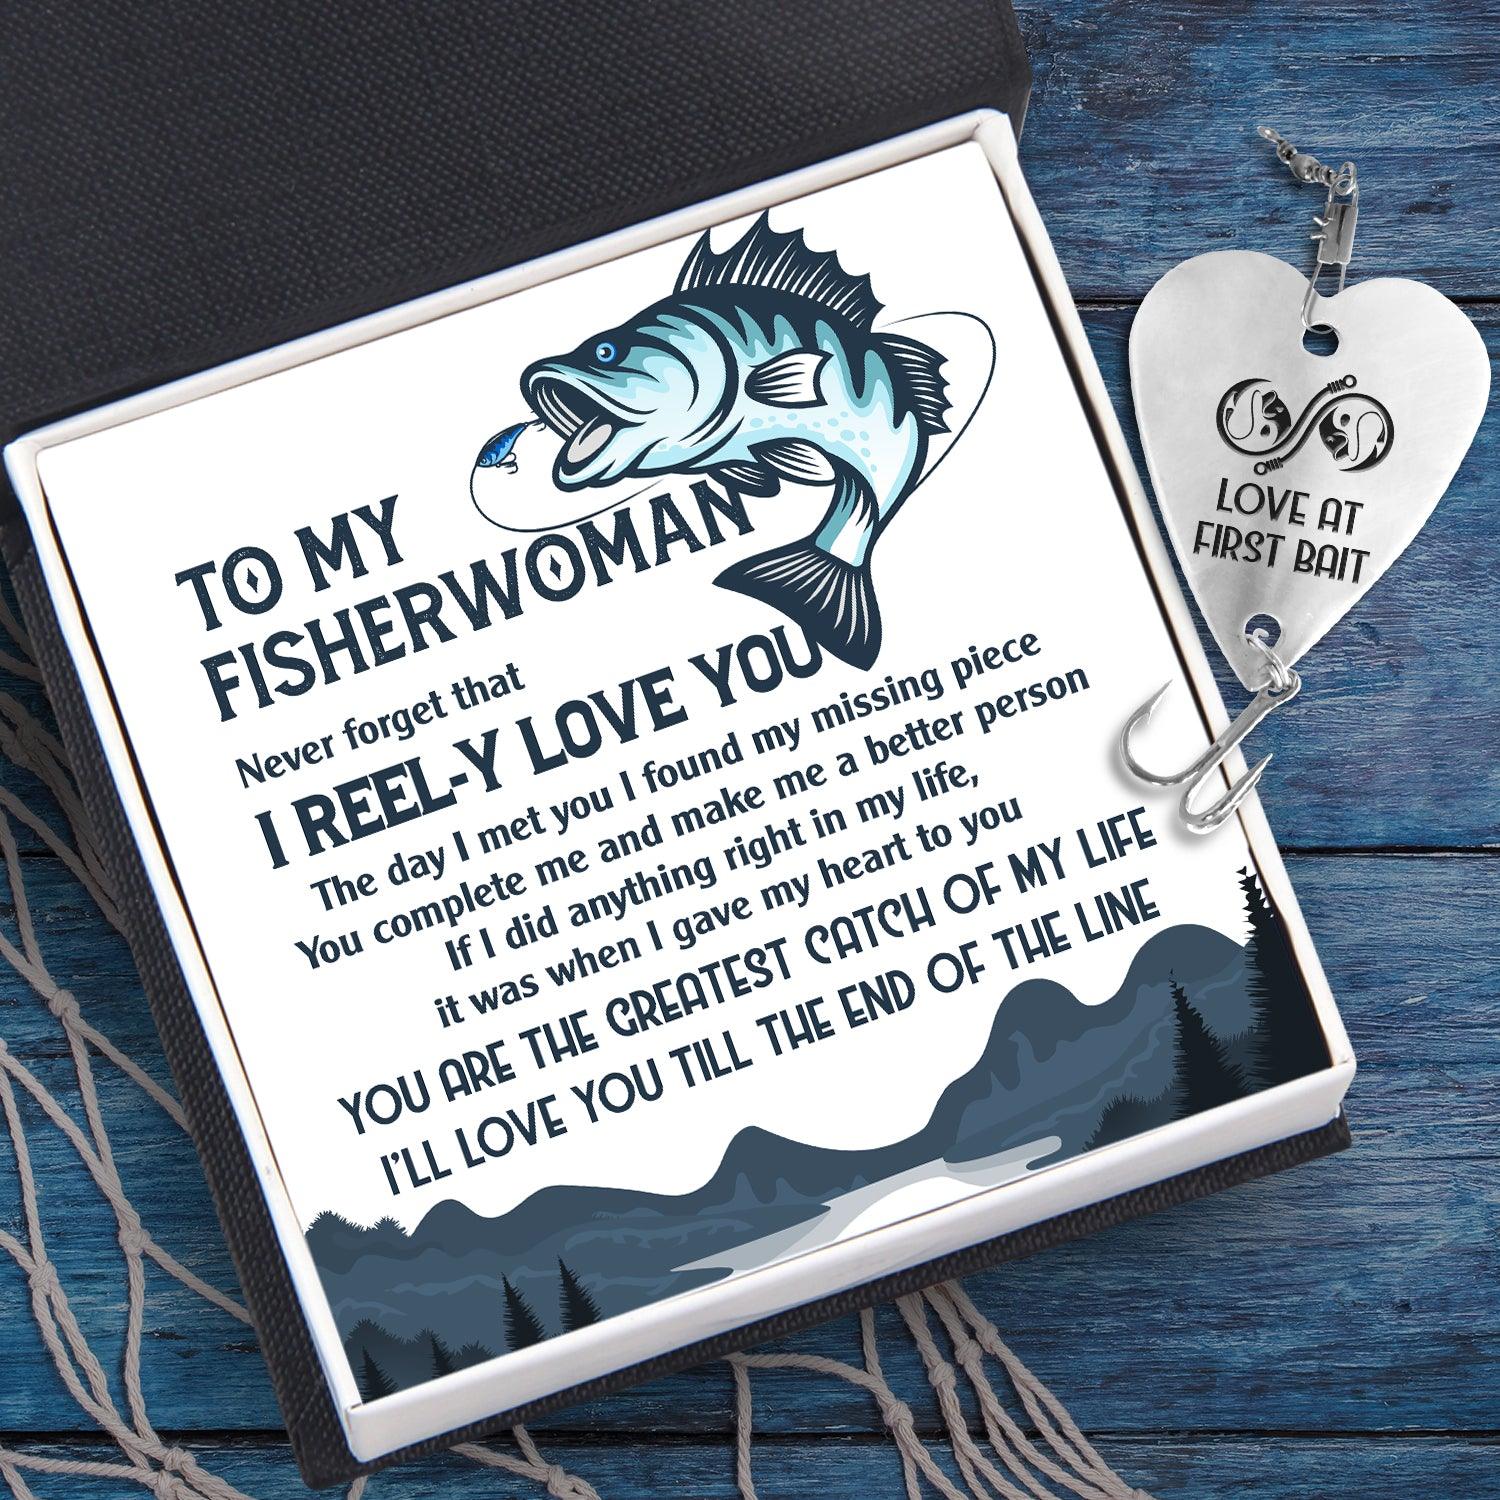 Heart Fishing Lure - Fishing - To My Fisherwoman - You Are The Greatest Catch Of My Life - Augfc13003 - Gifts Holder